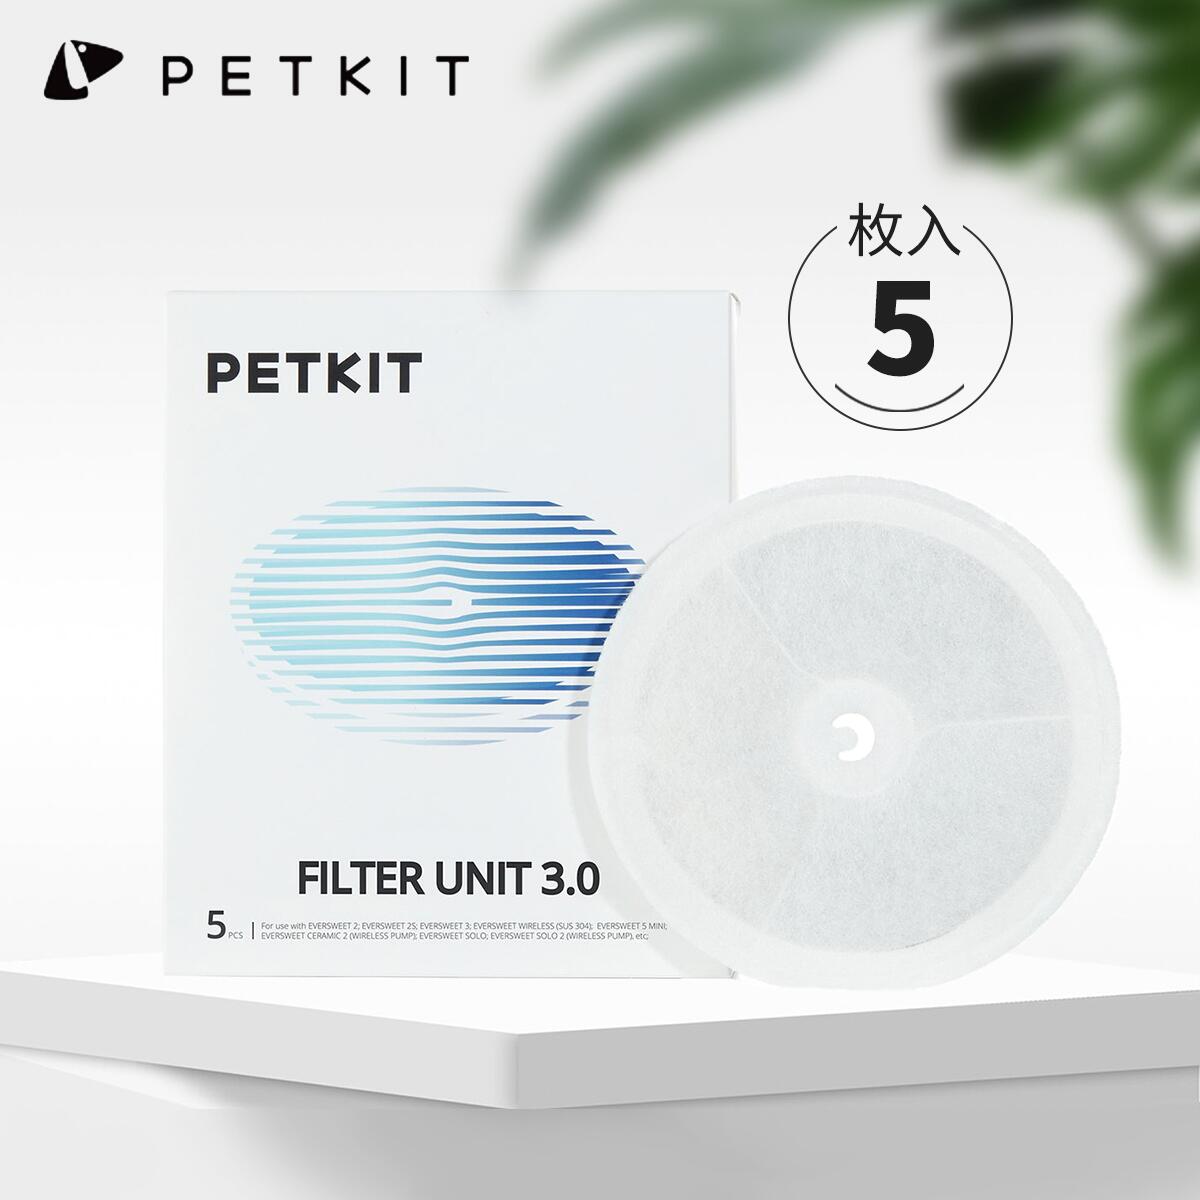 PETKIT【正規品】フィルター 3.0 新型 ペットキット 給水器(2nd世代　3nd世代 PETKIT CYBERTAIL)　給水器交換用フィルター(5コセット)